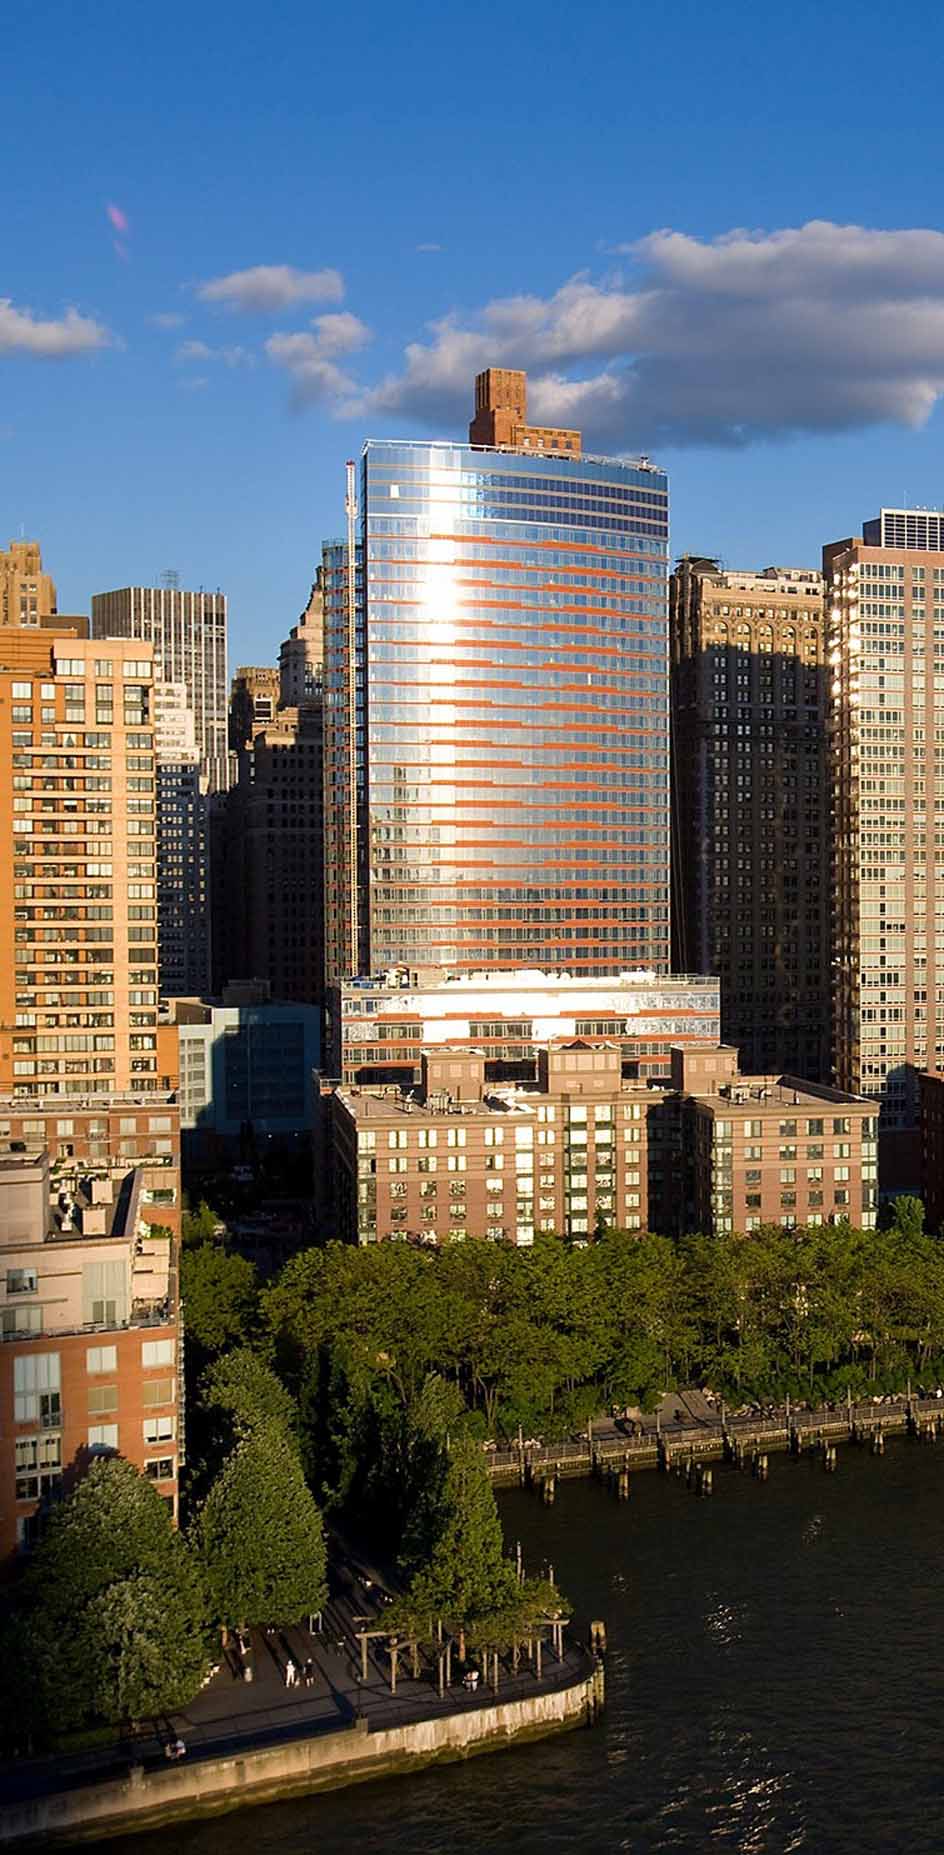 Platinum LEED Manhattan condo and country's greenest high-rise. Leading advocate of eco-friendly & sustainable living. Tweets moderated by Complete Body & Spa